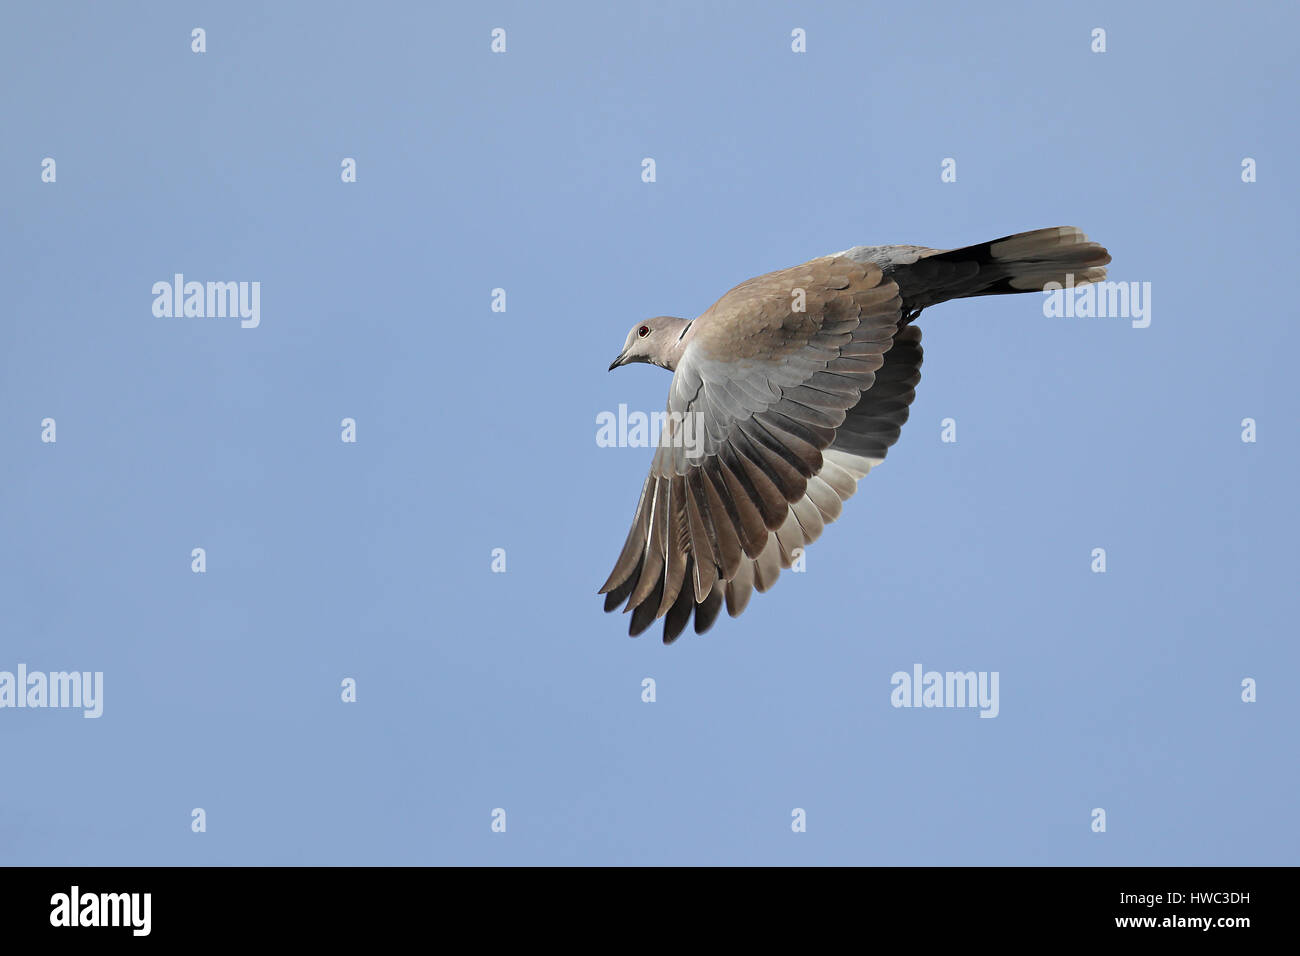 Eurasian Collared Dove, Streptopelia decaocto, in flight with open wings pointed downward against blue sky Stock Photo